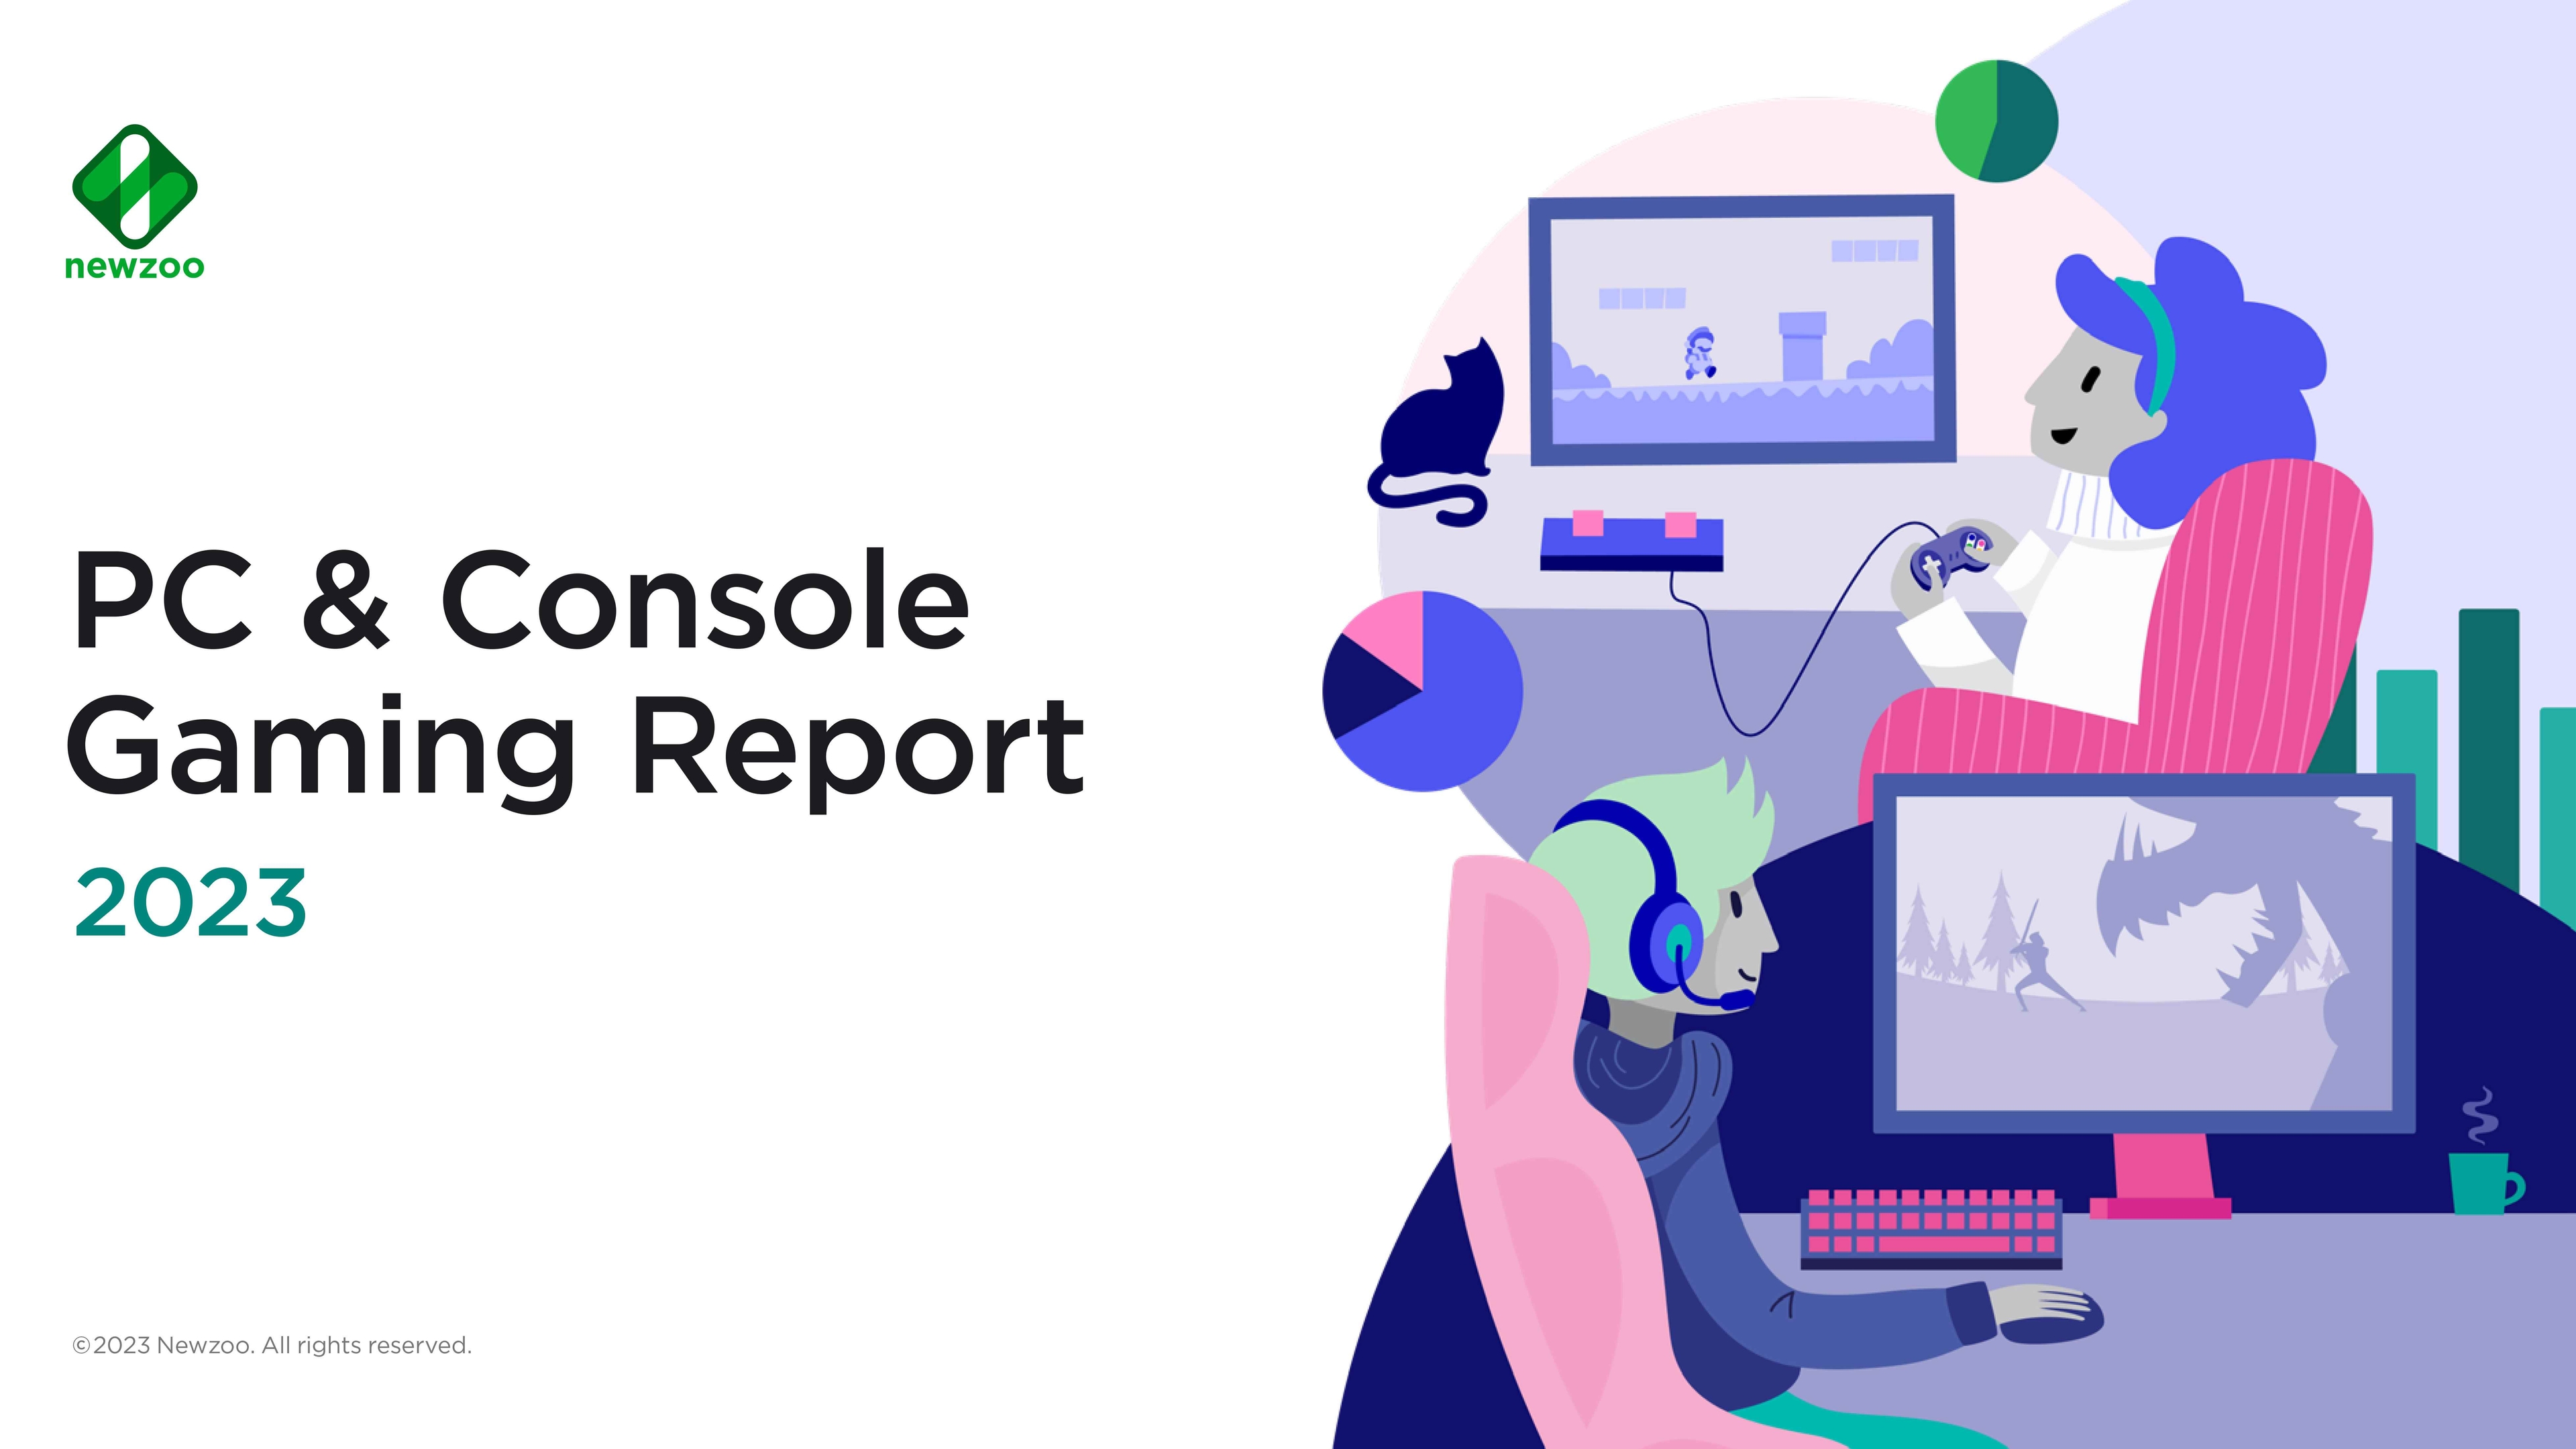 Newzoo PC & Console Gaming Report 2023